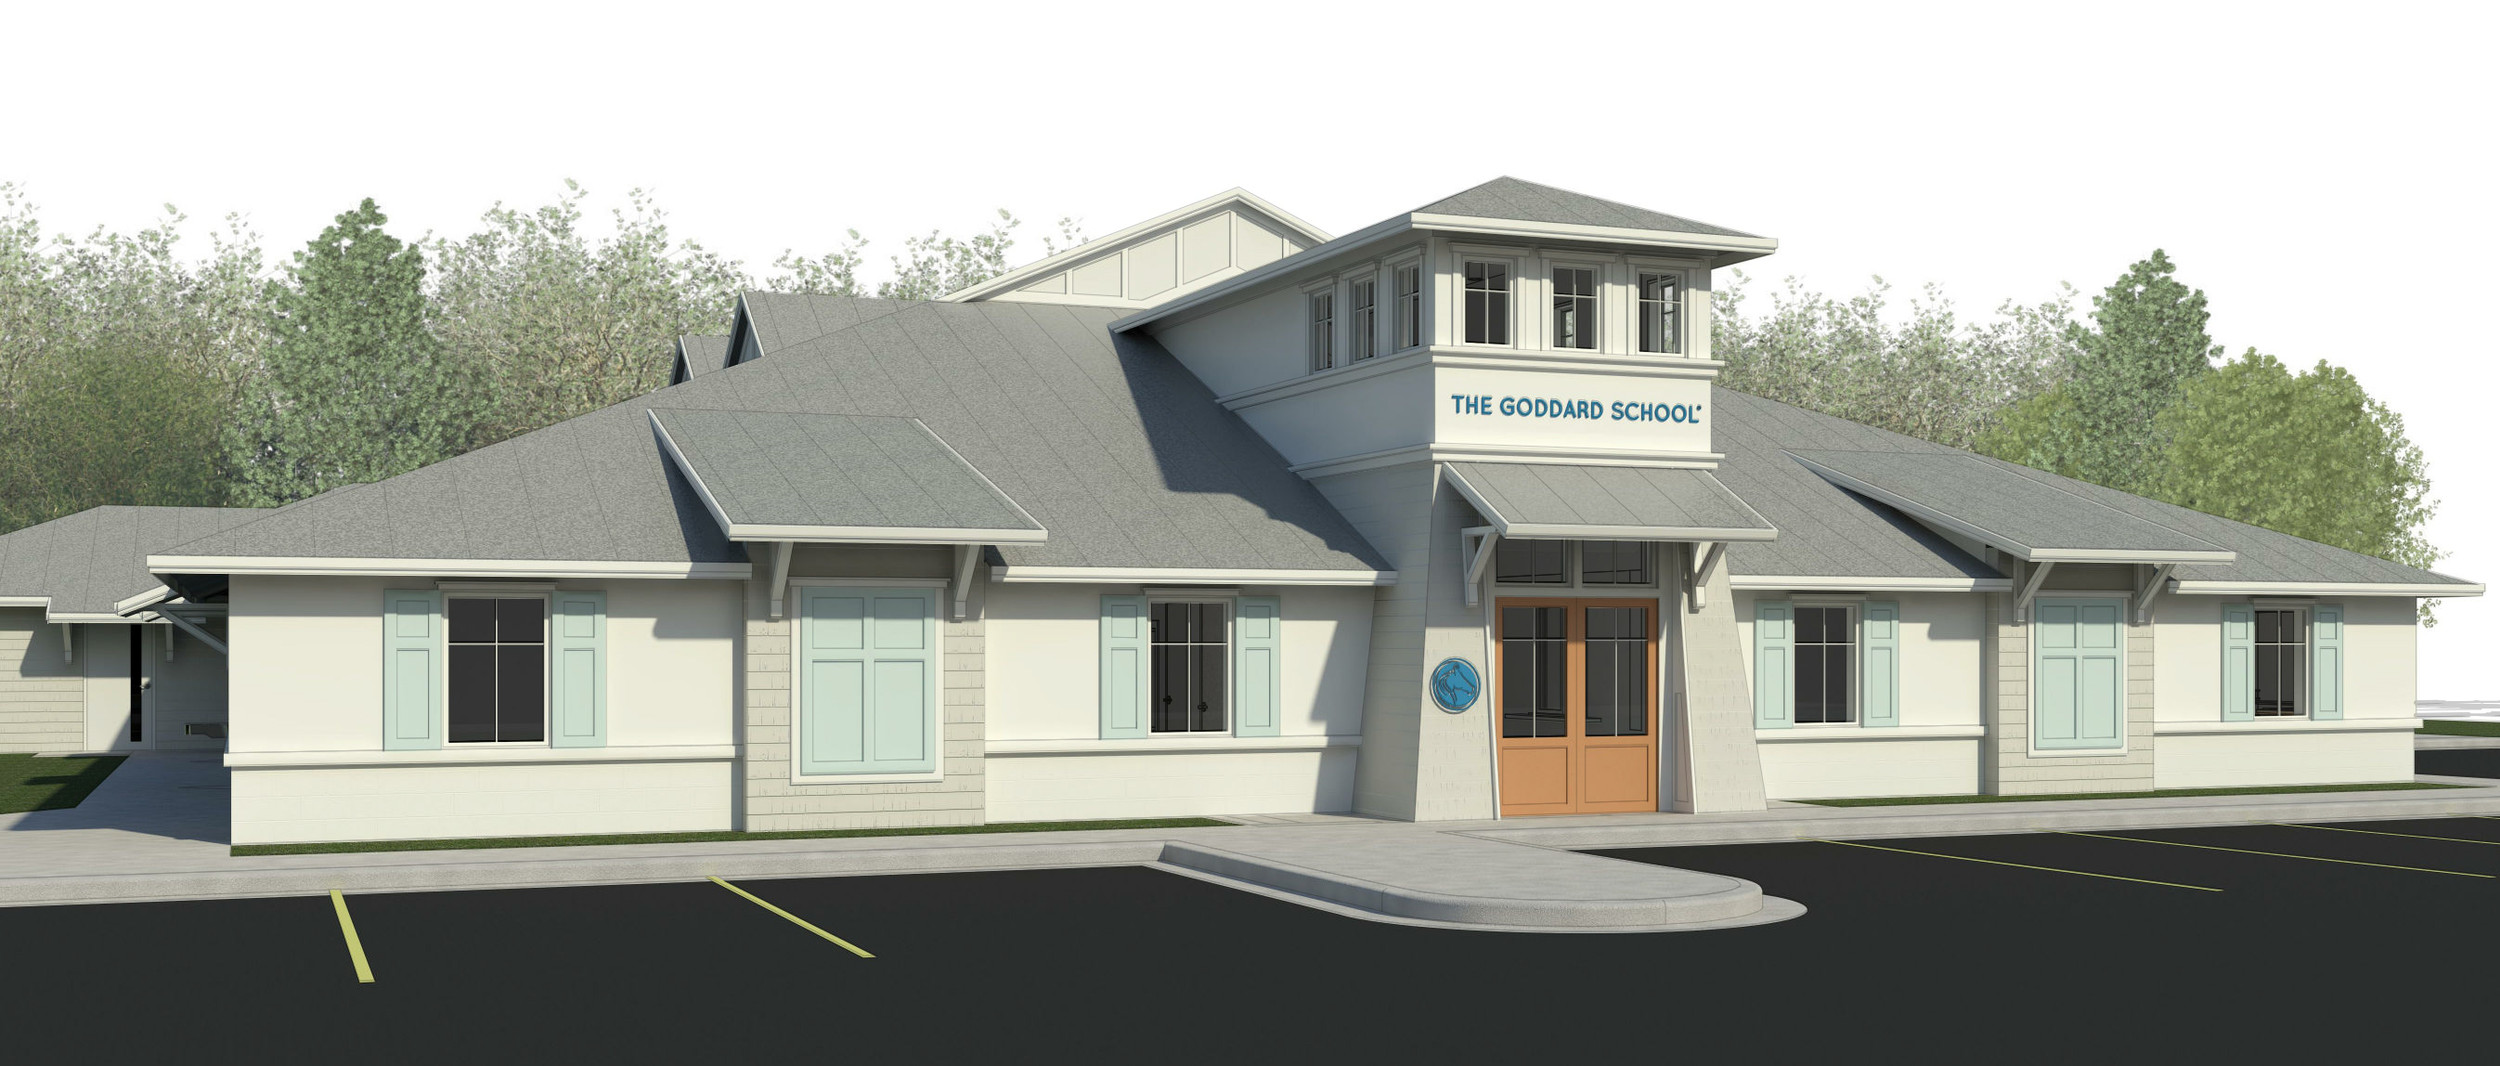 The Goddard School will be located in the spot of the former Childtime daycare building at 45 Executive Way, Ponte Vedra Beach.